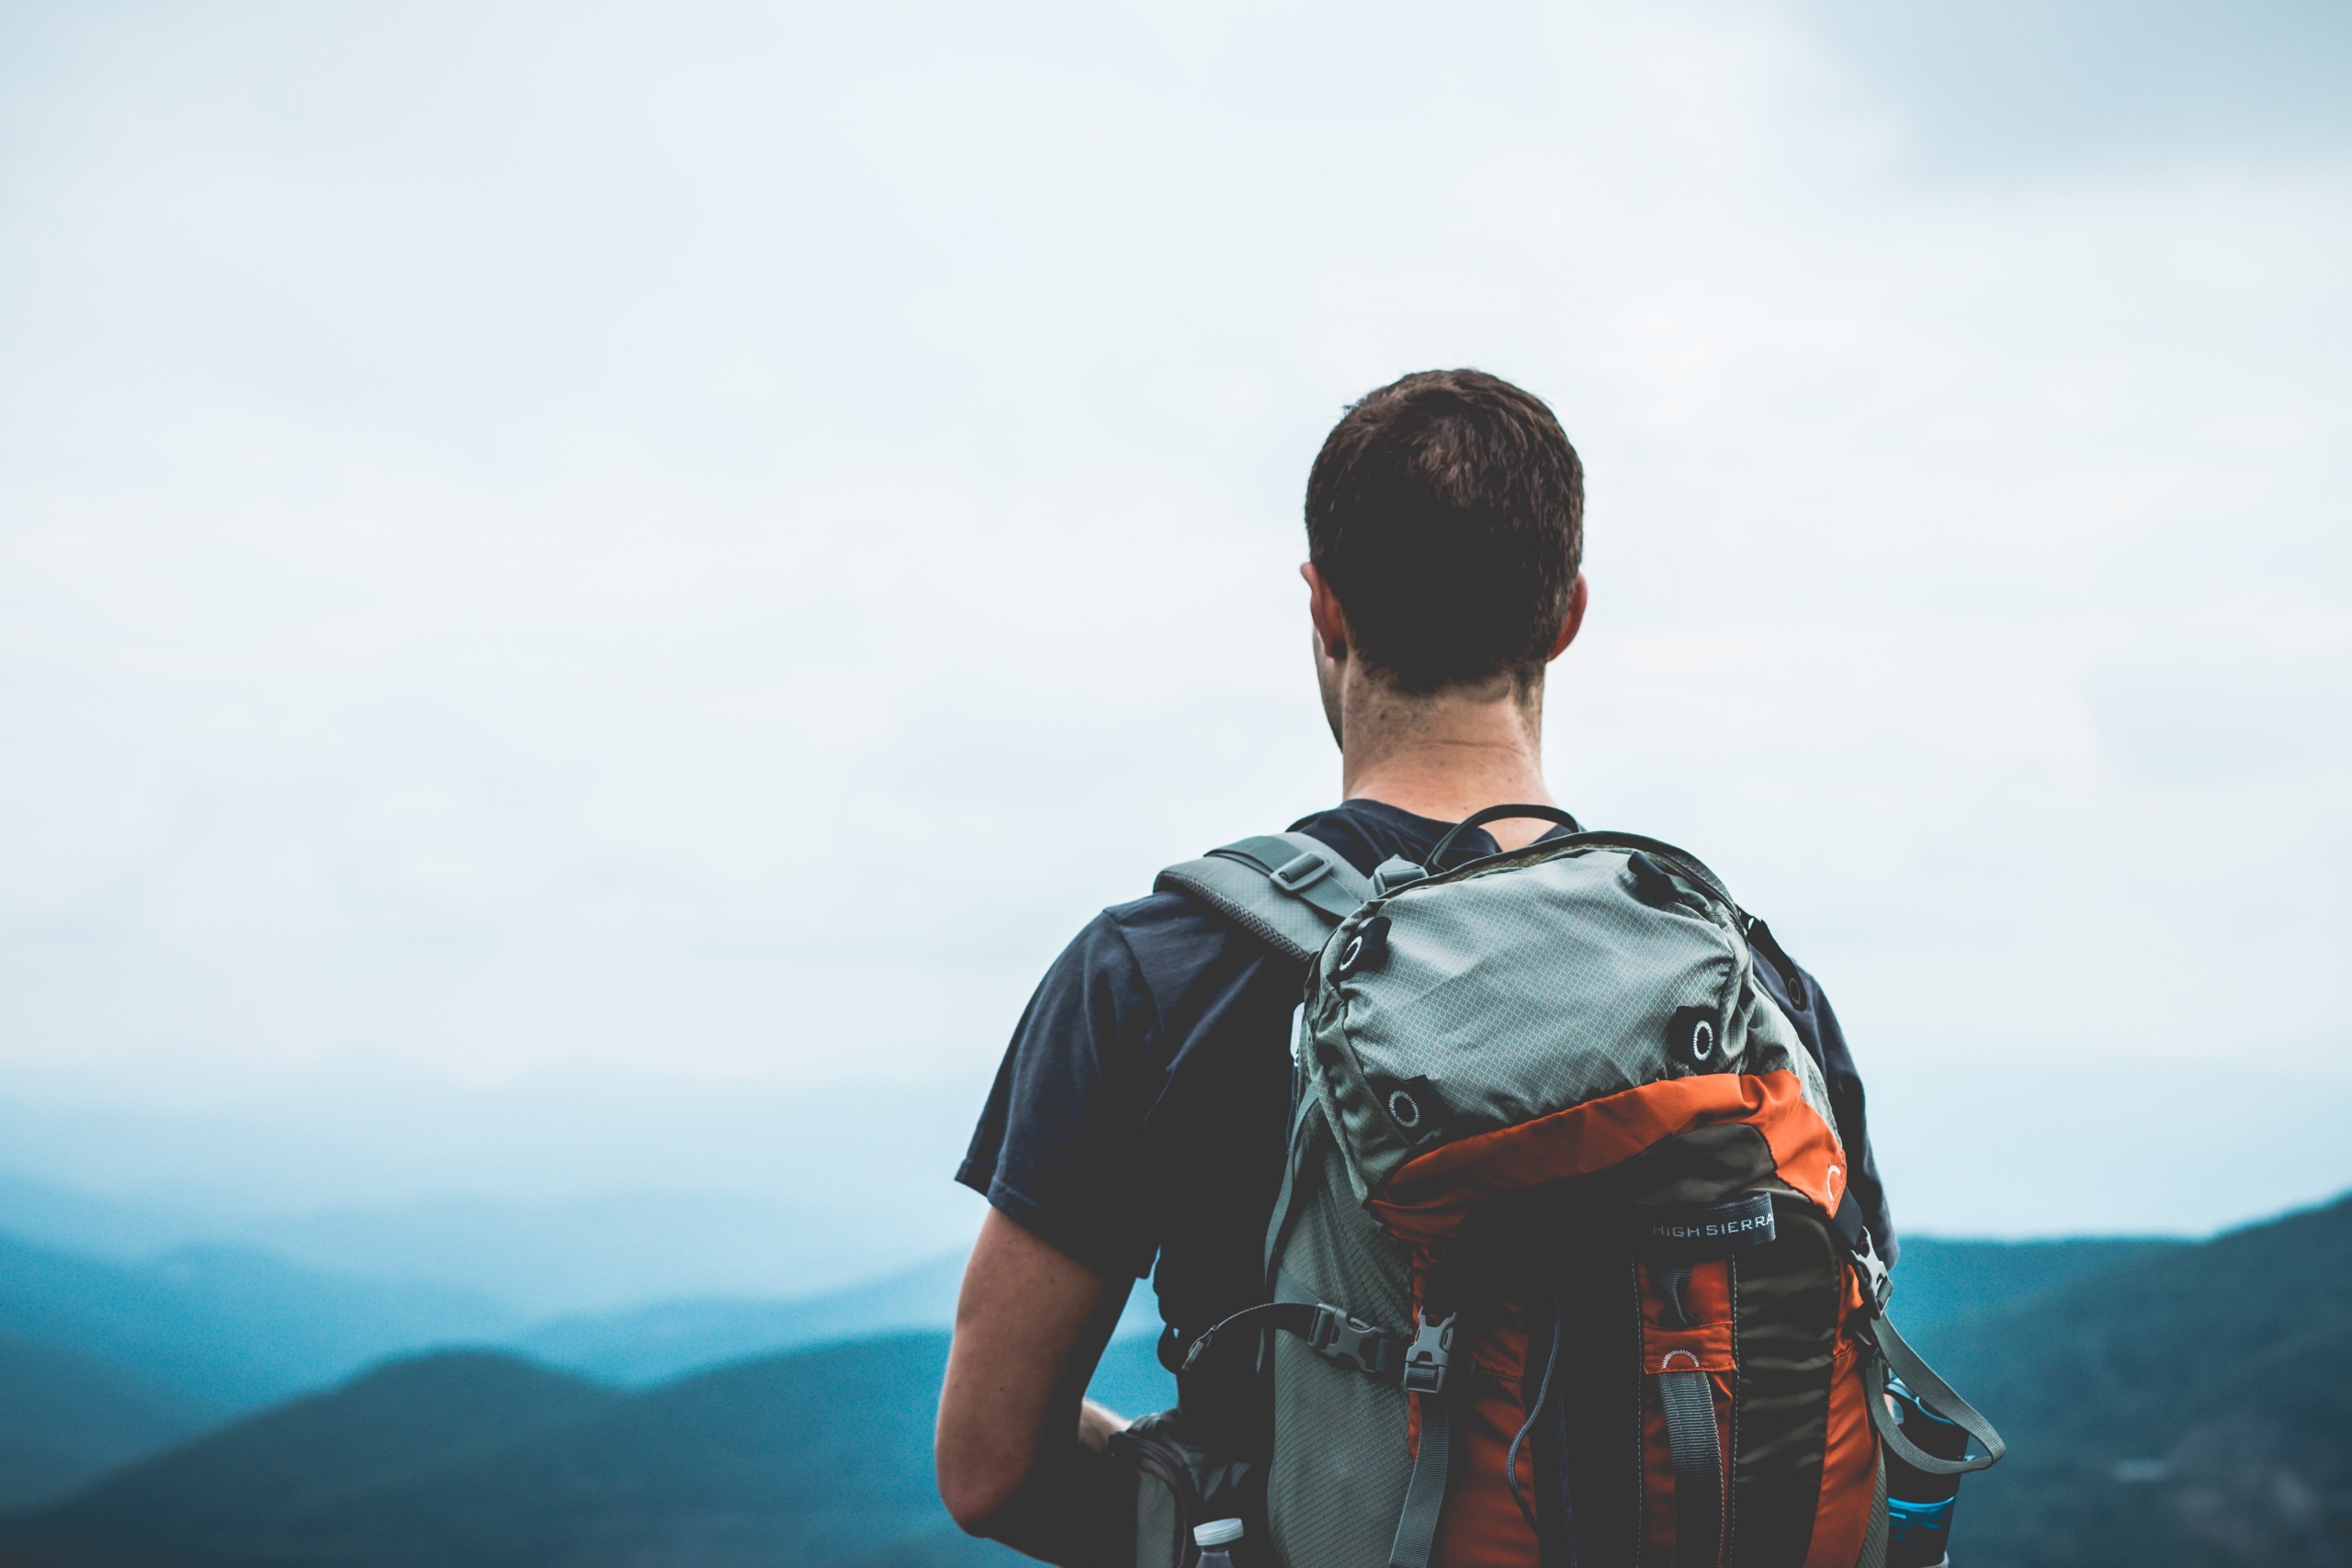 man looking out into beautiful mountainous scenery while wearing a backpack after a hike up to the top